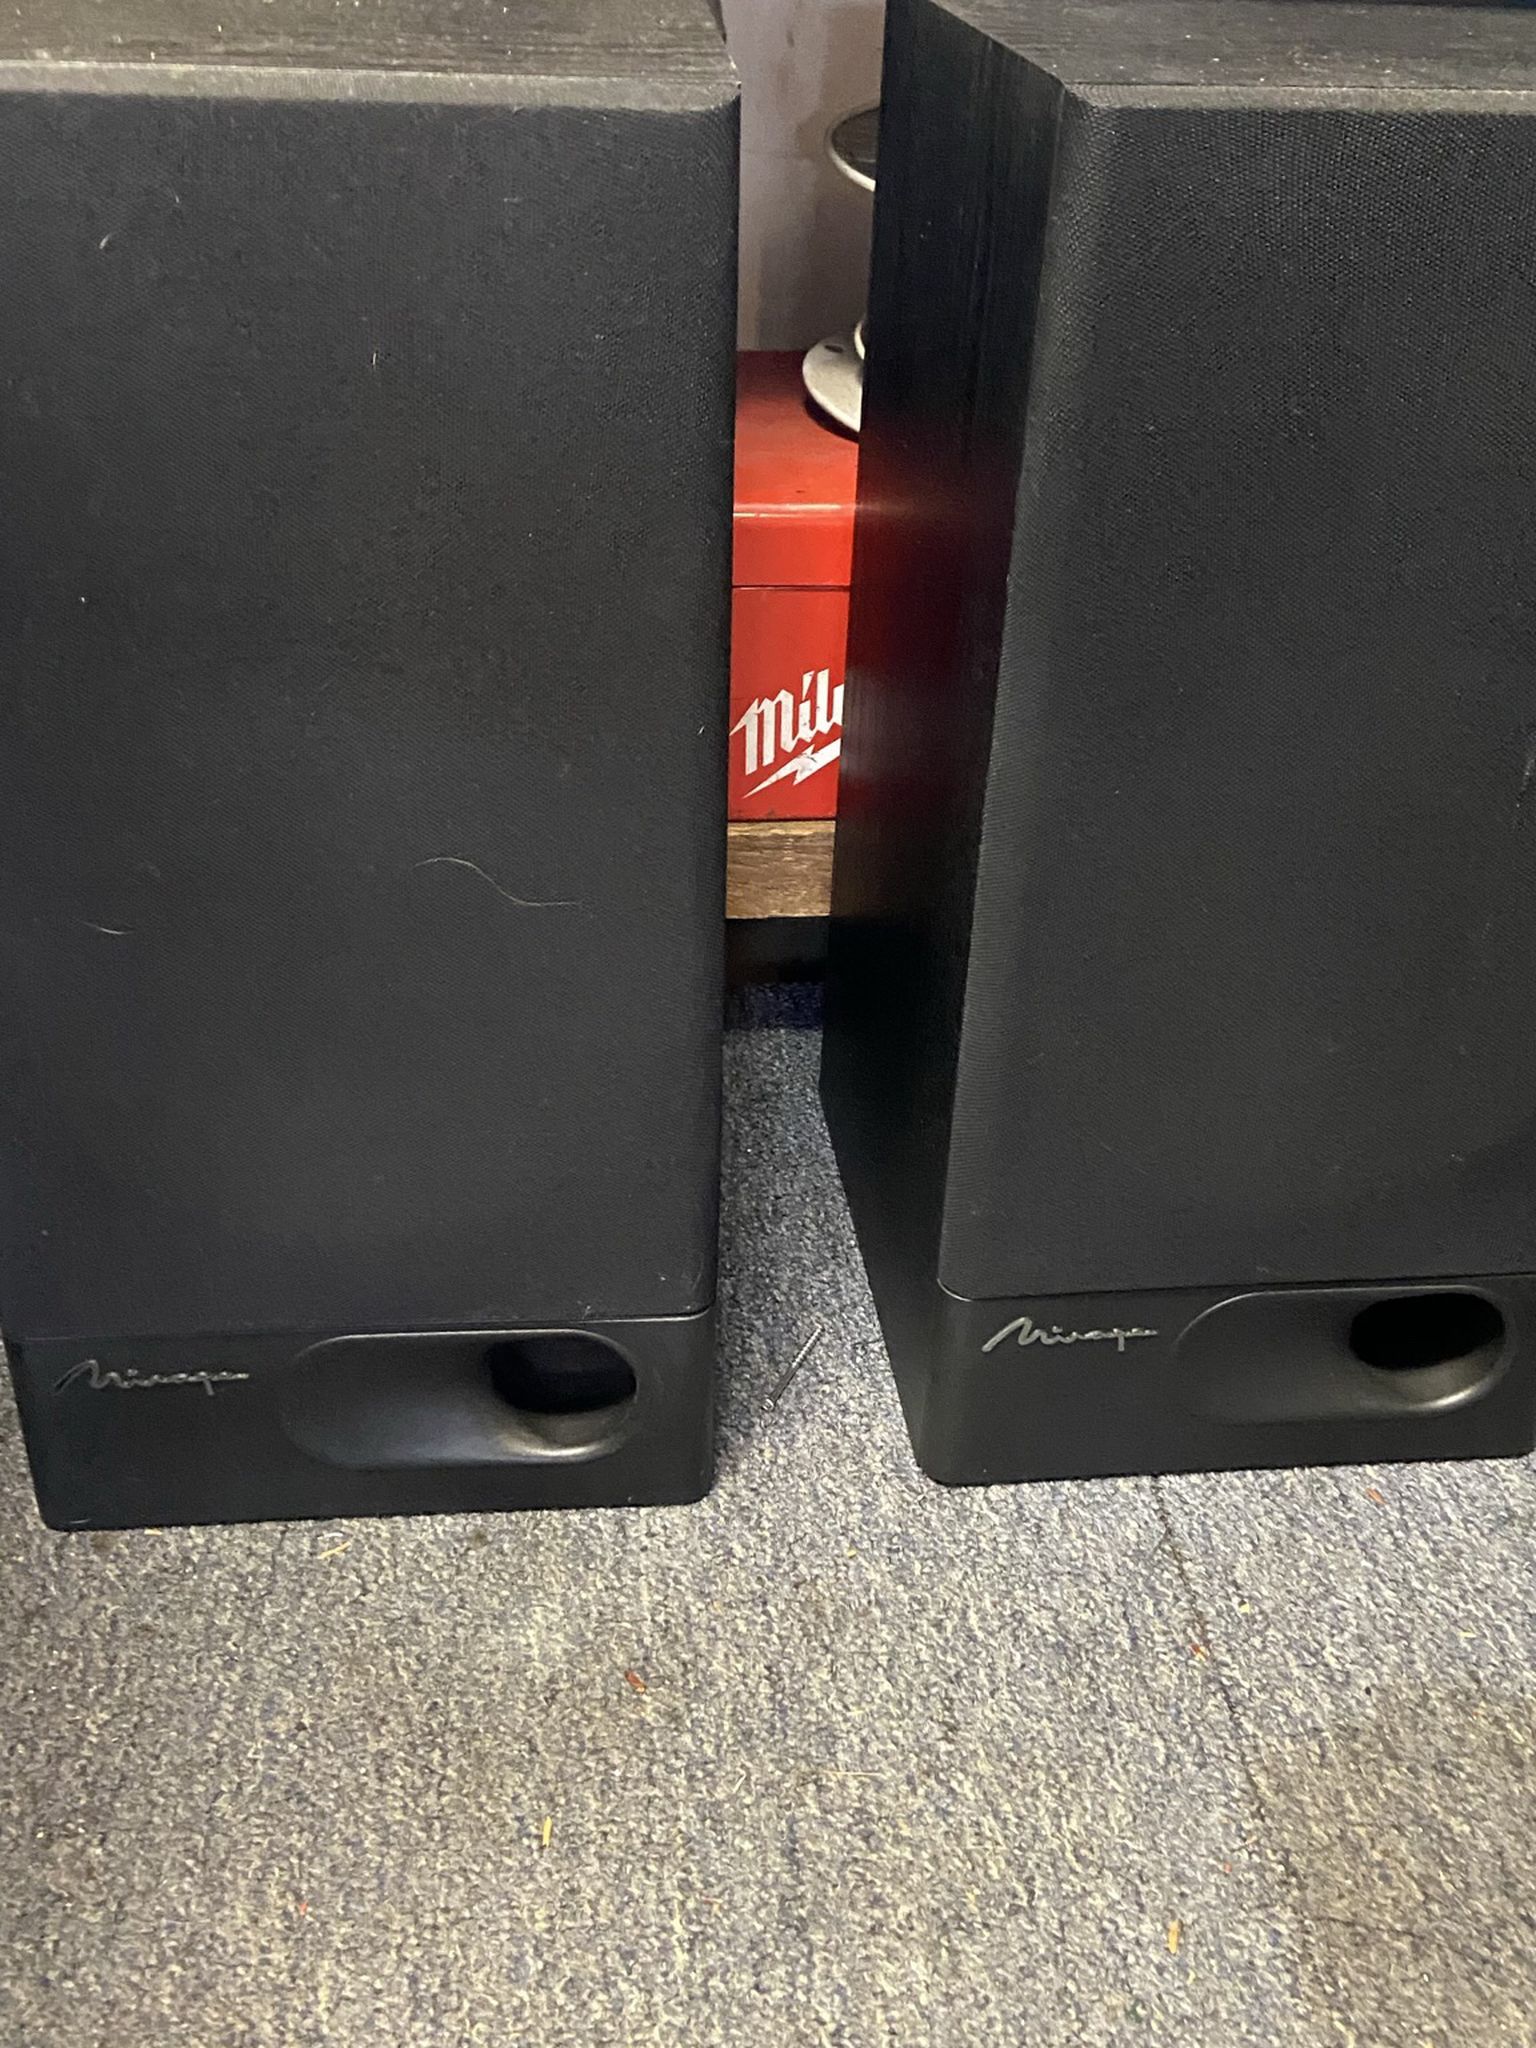 Mirage surround sound speakers good condition Purchased from tweeter stereo Five speakers in a big subwoofer